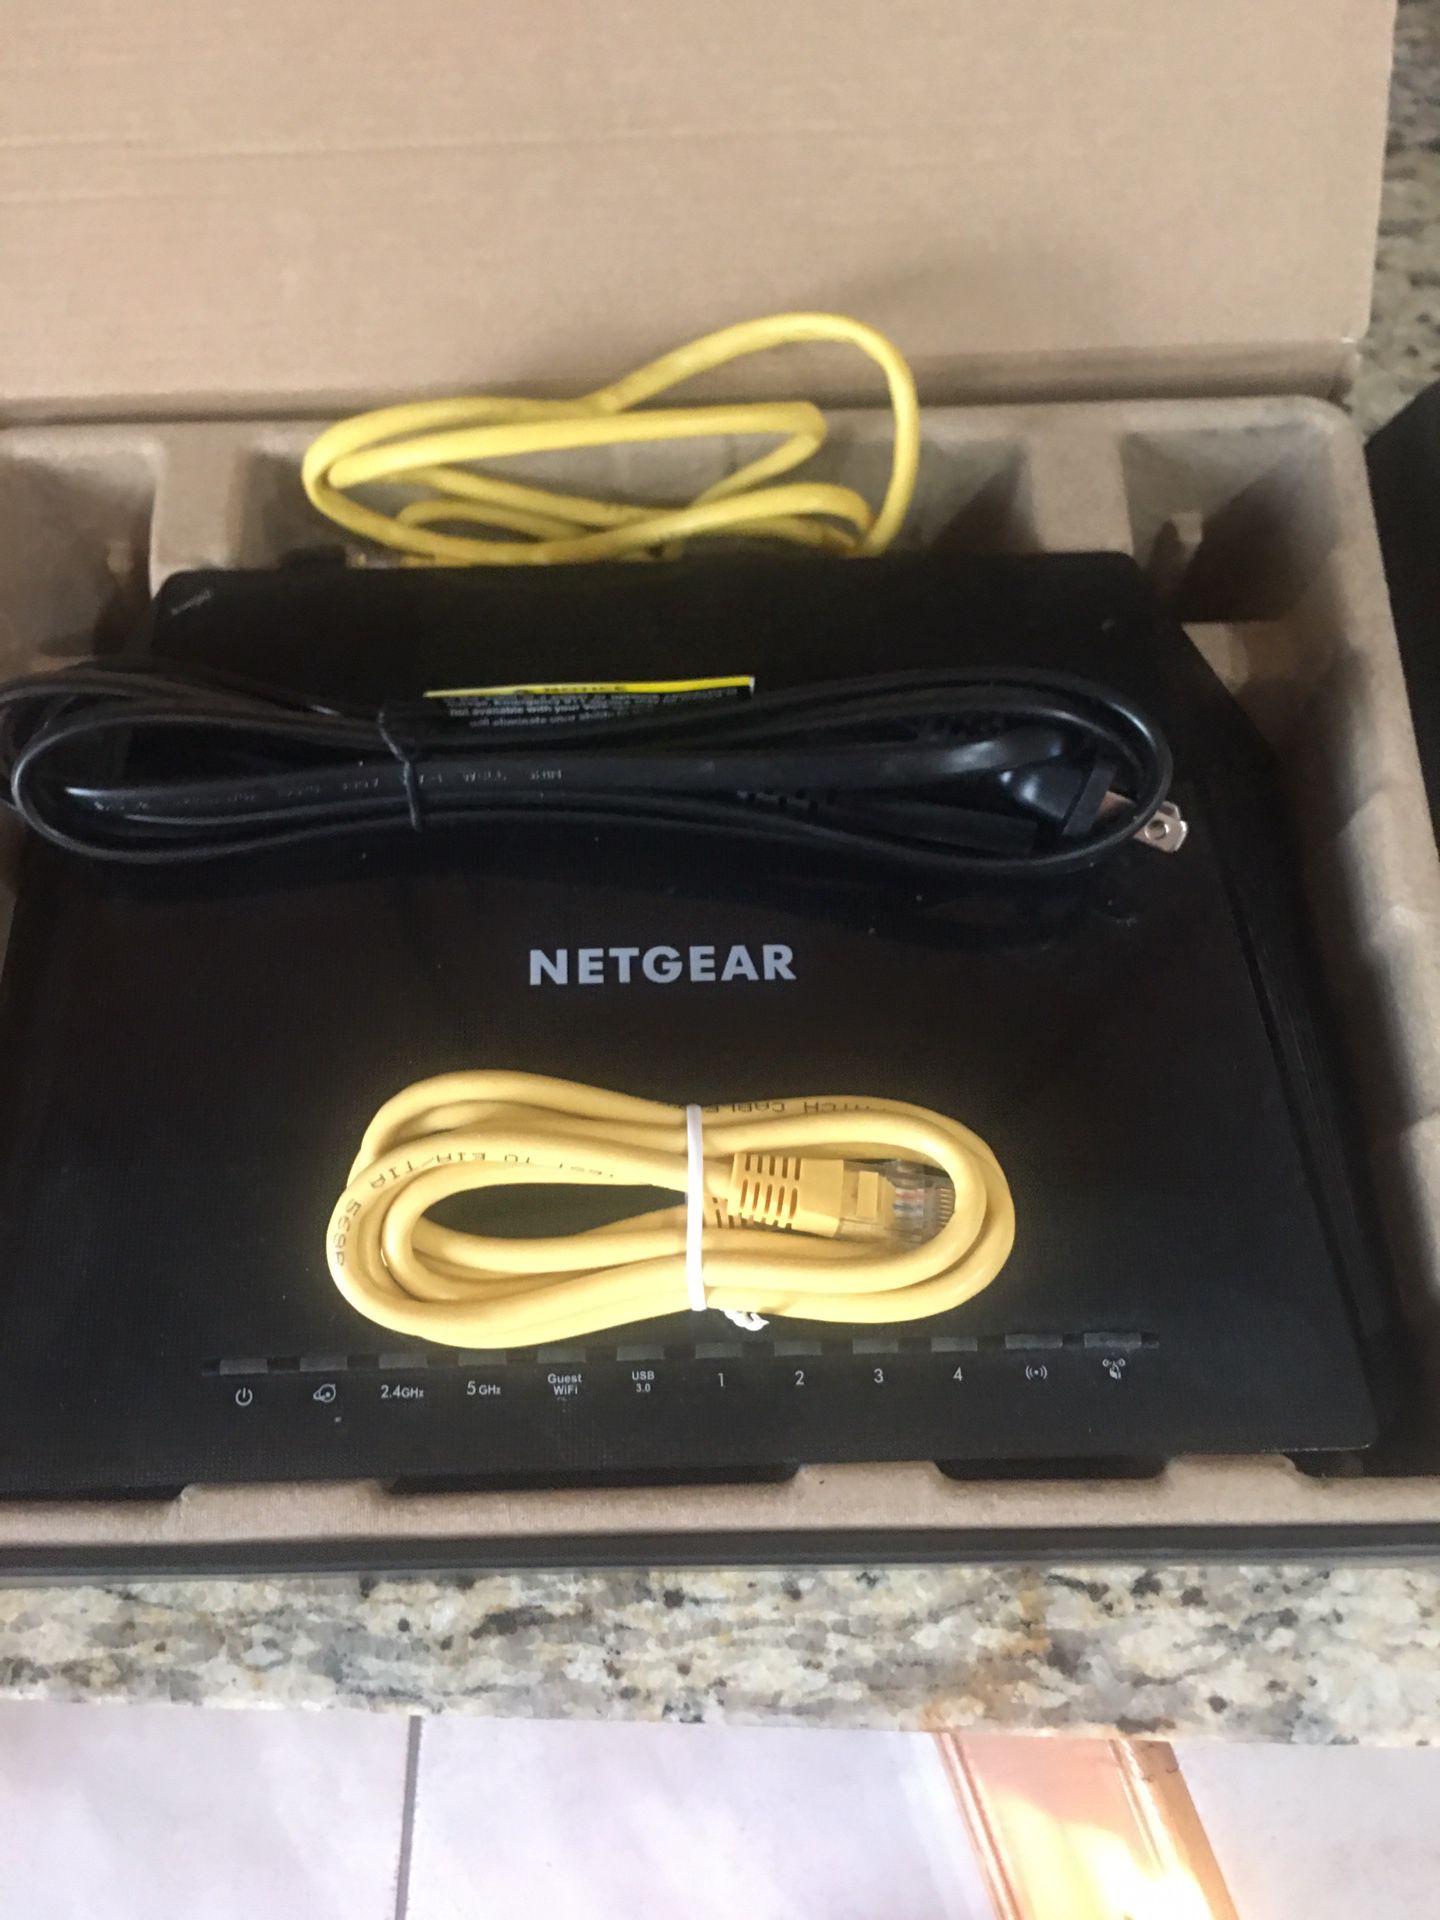 Netgear Router with cords